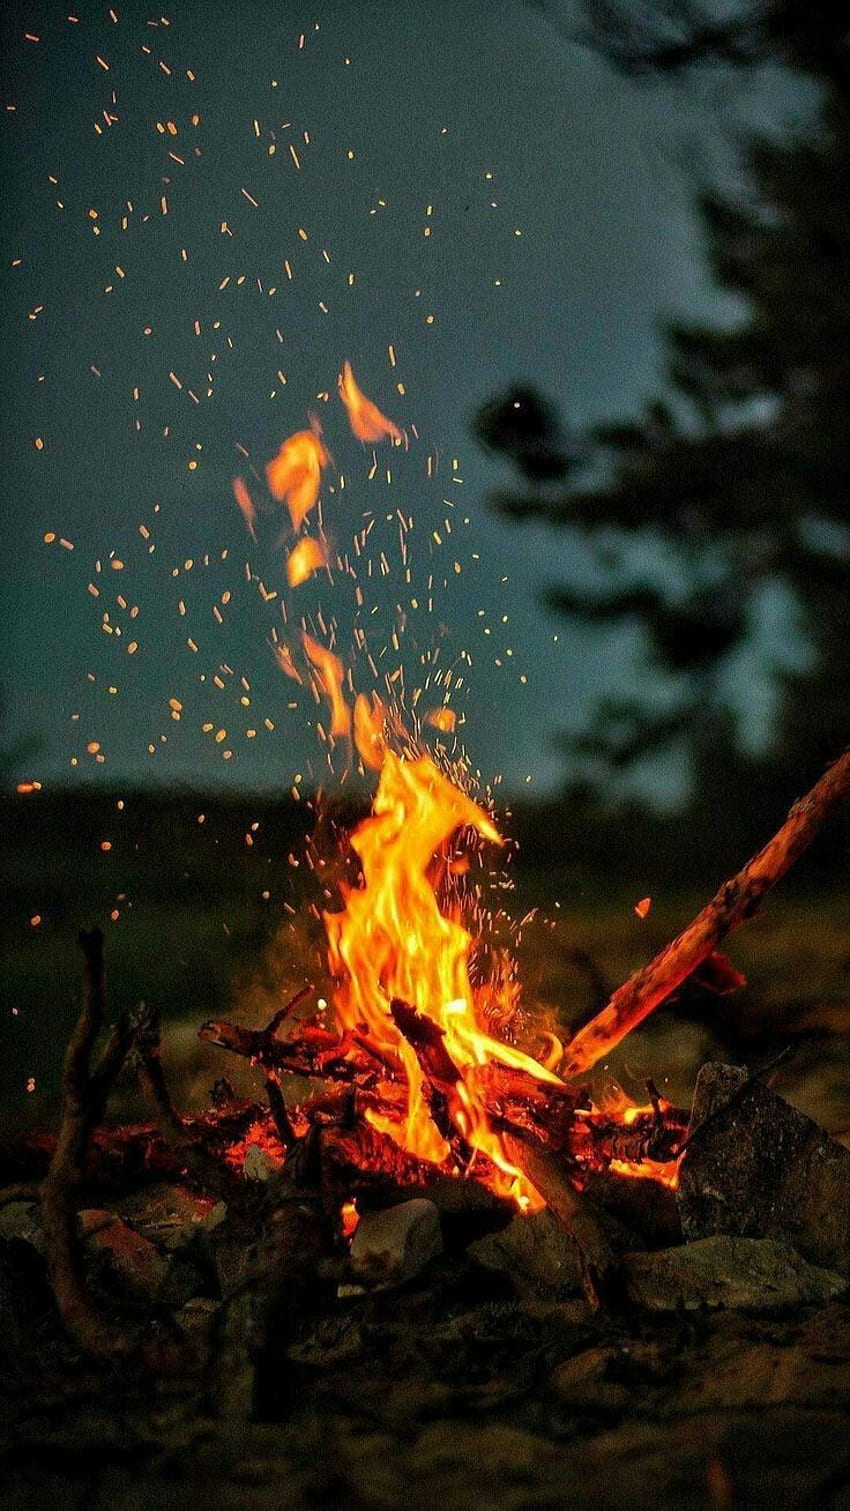 A campfire burns in the dark, sparks flying in all directions. - Cozy, western, fire